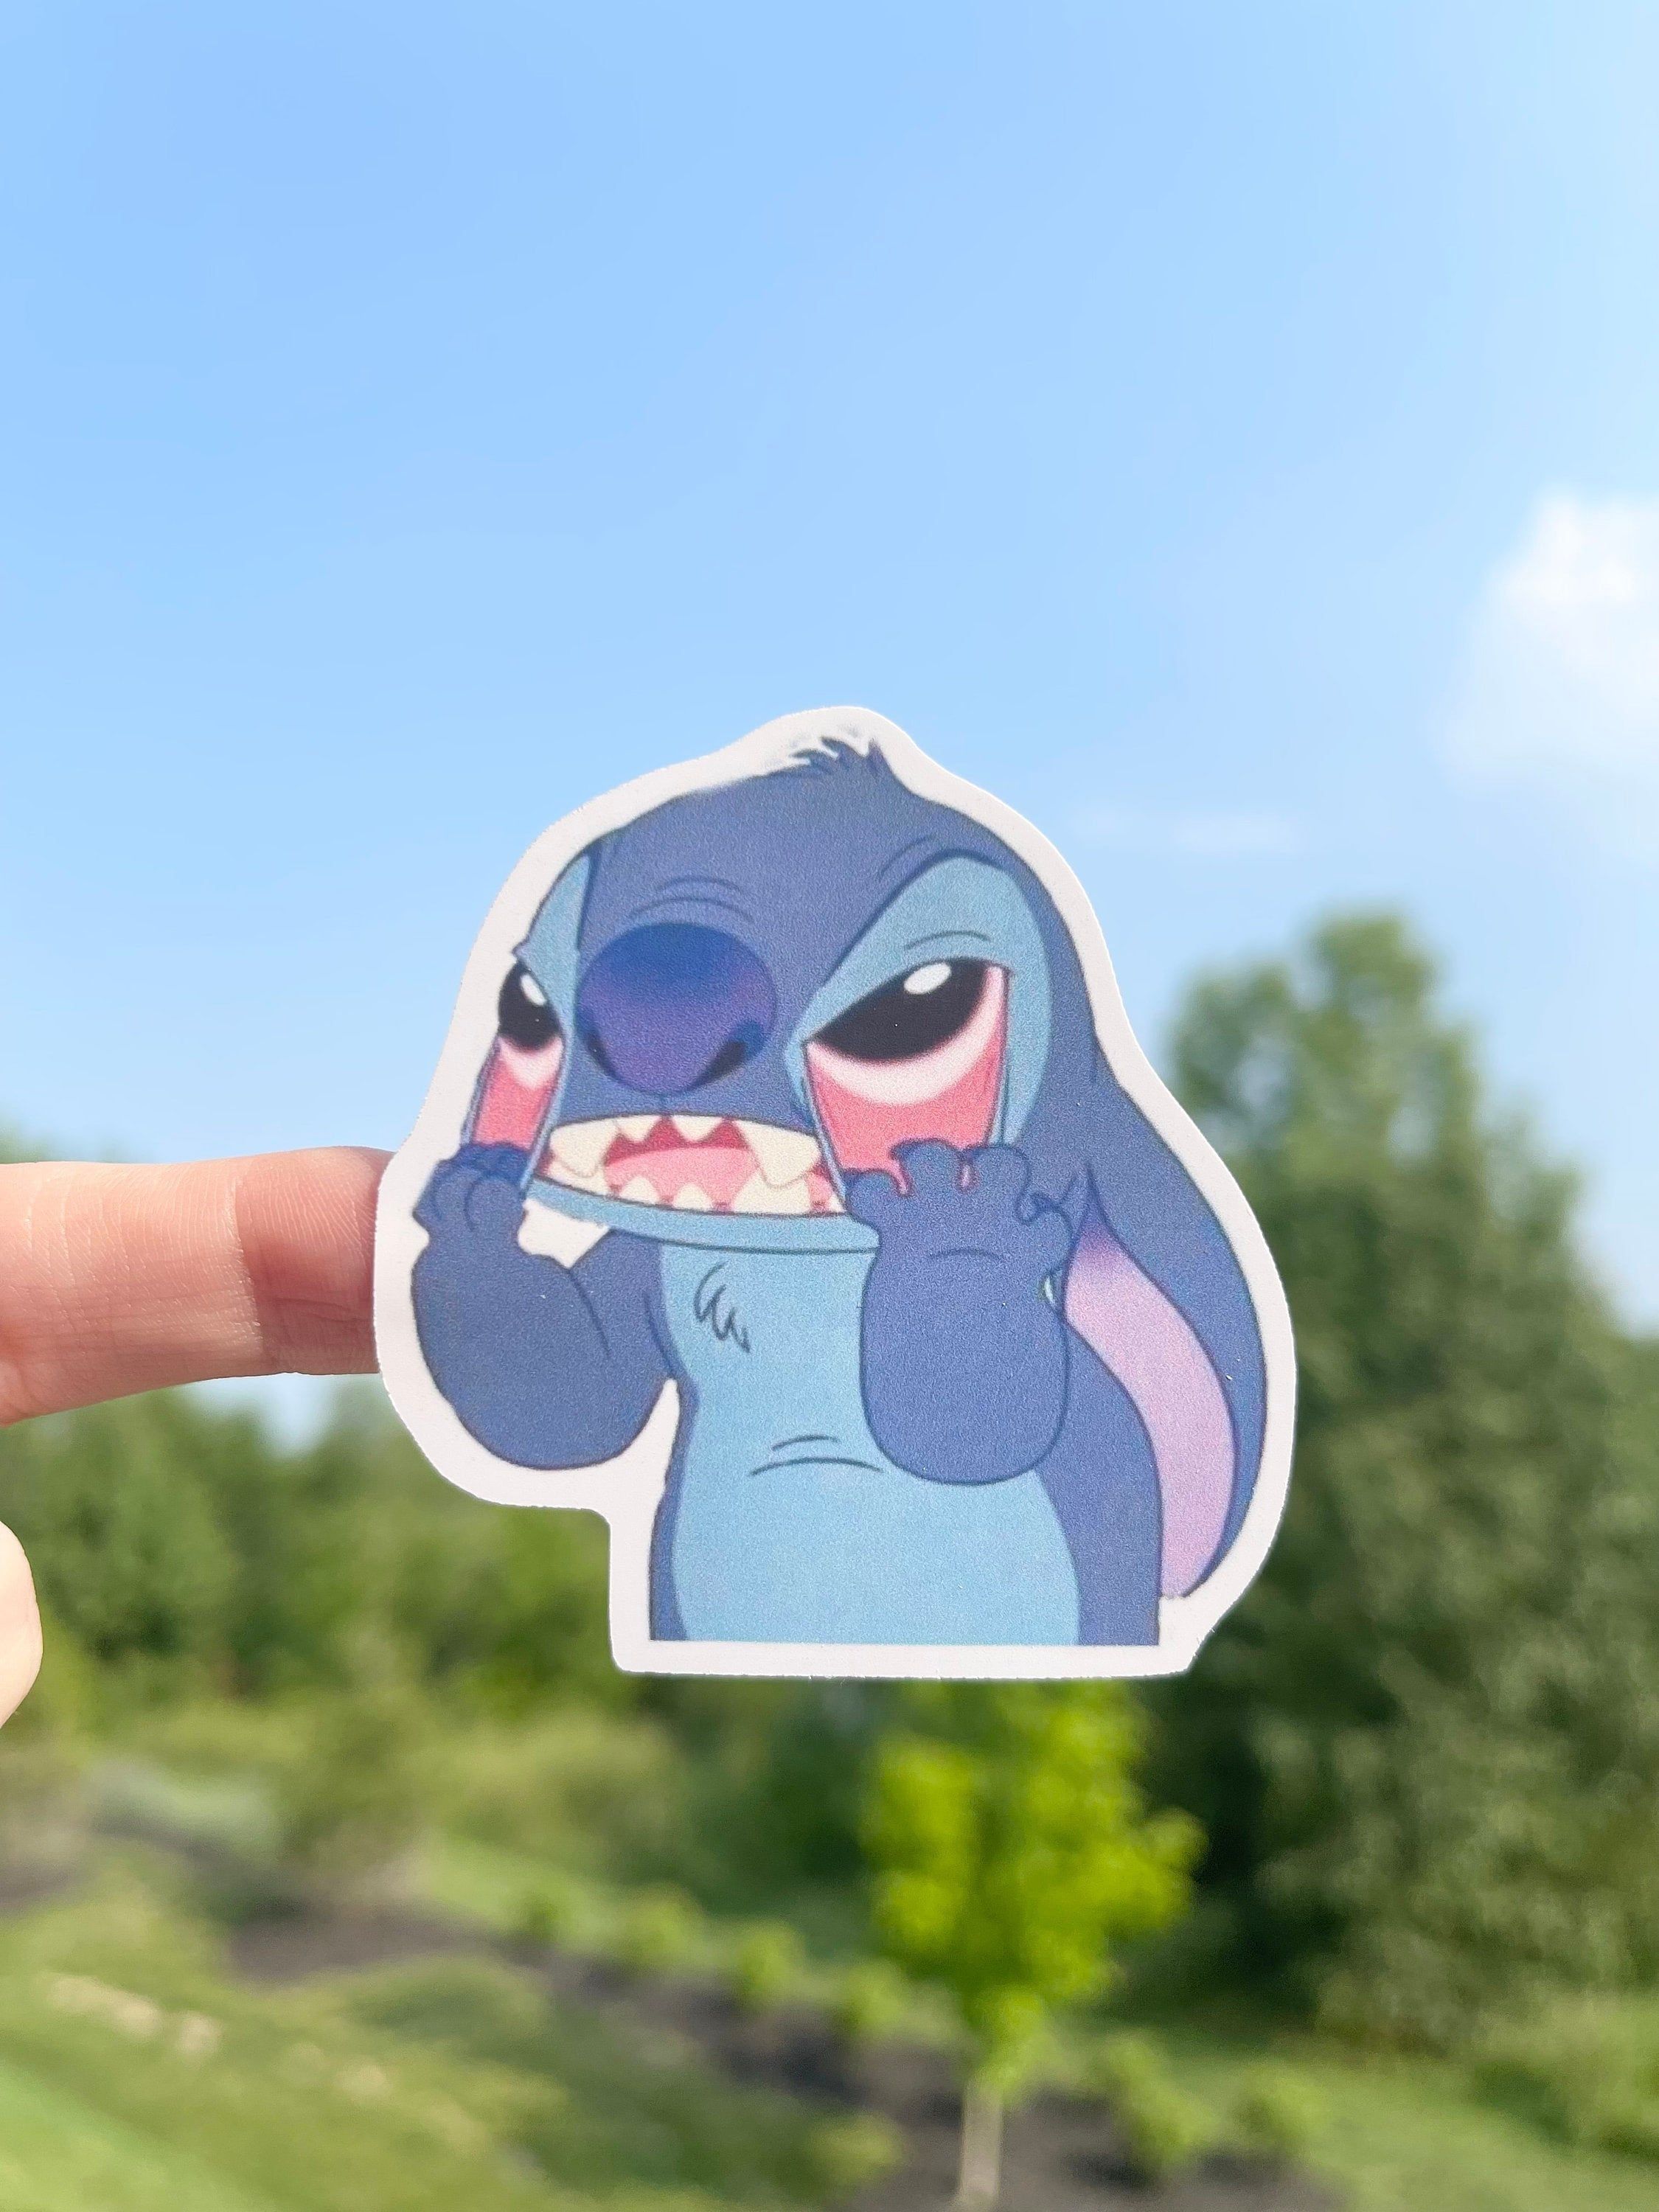 A hand holding a sticker of a cartoon character, Stitch from Lilo and Stitch, holding a shark tooth. - Stitch